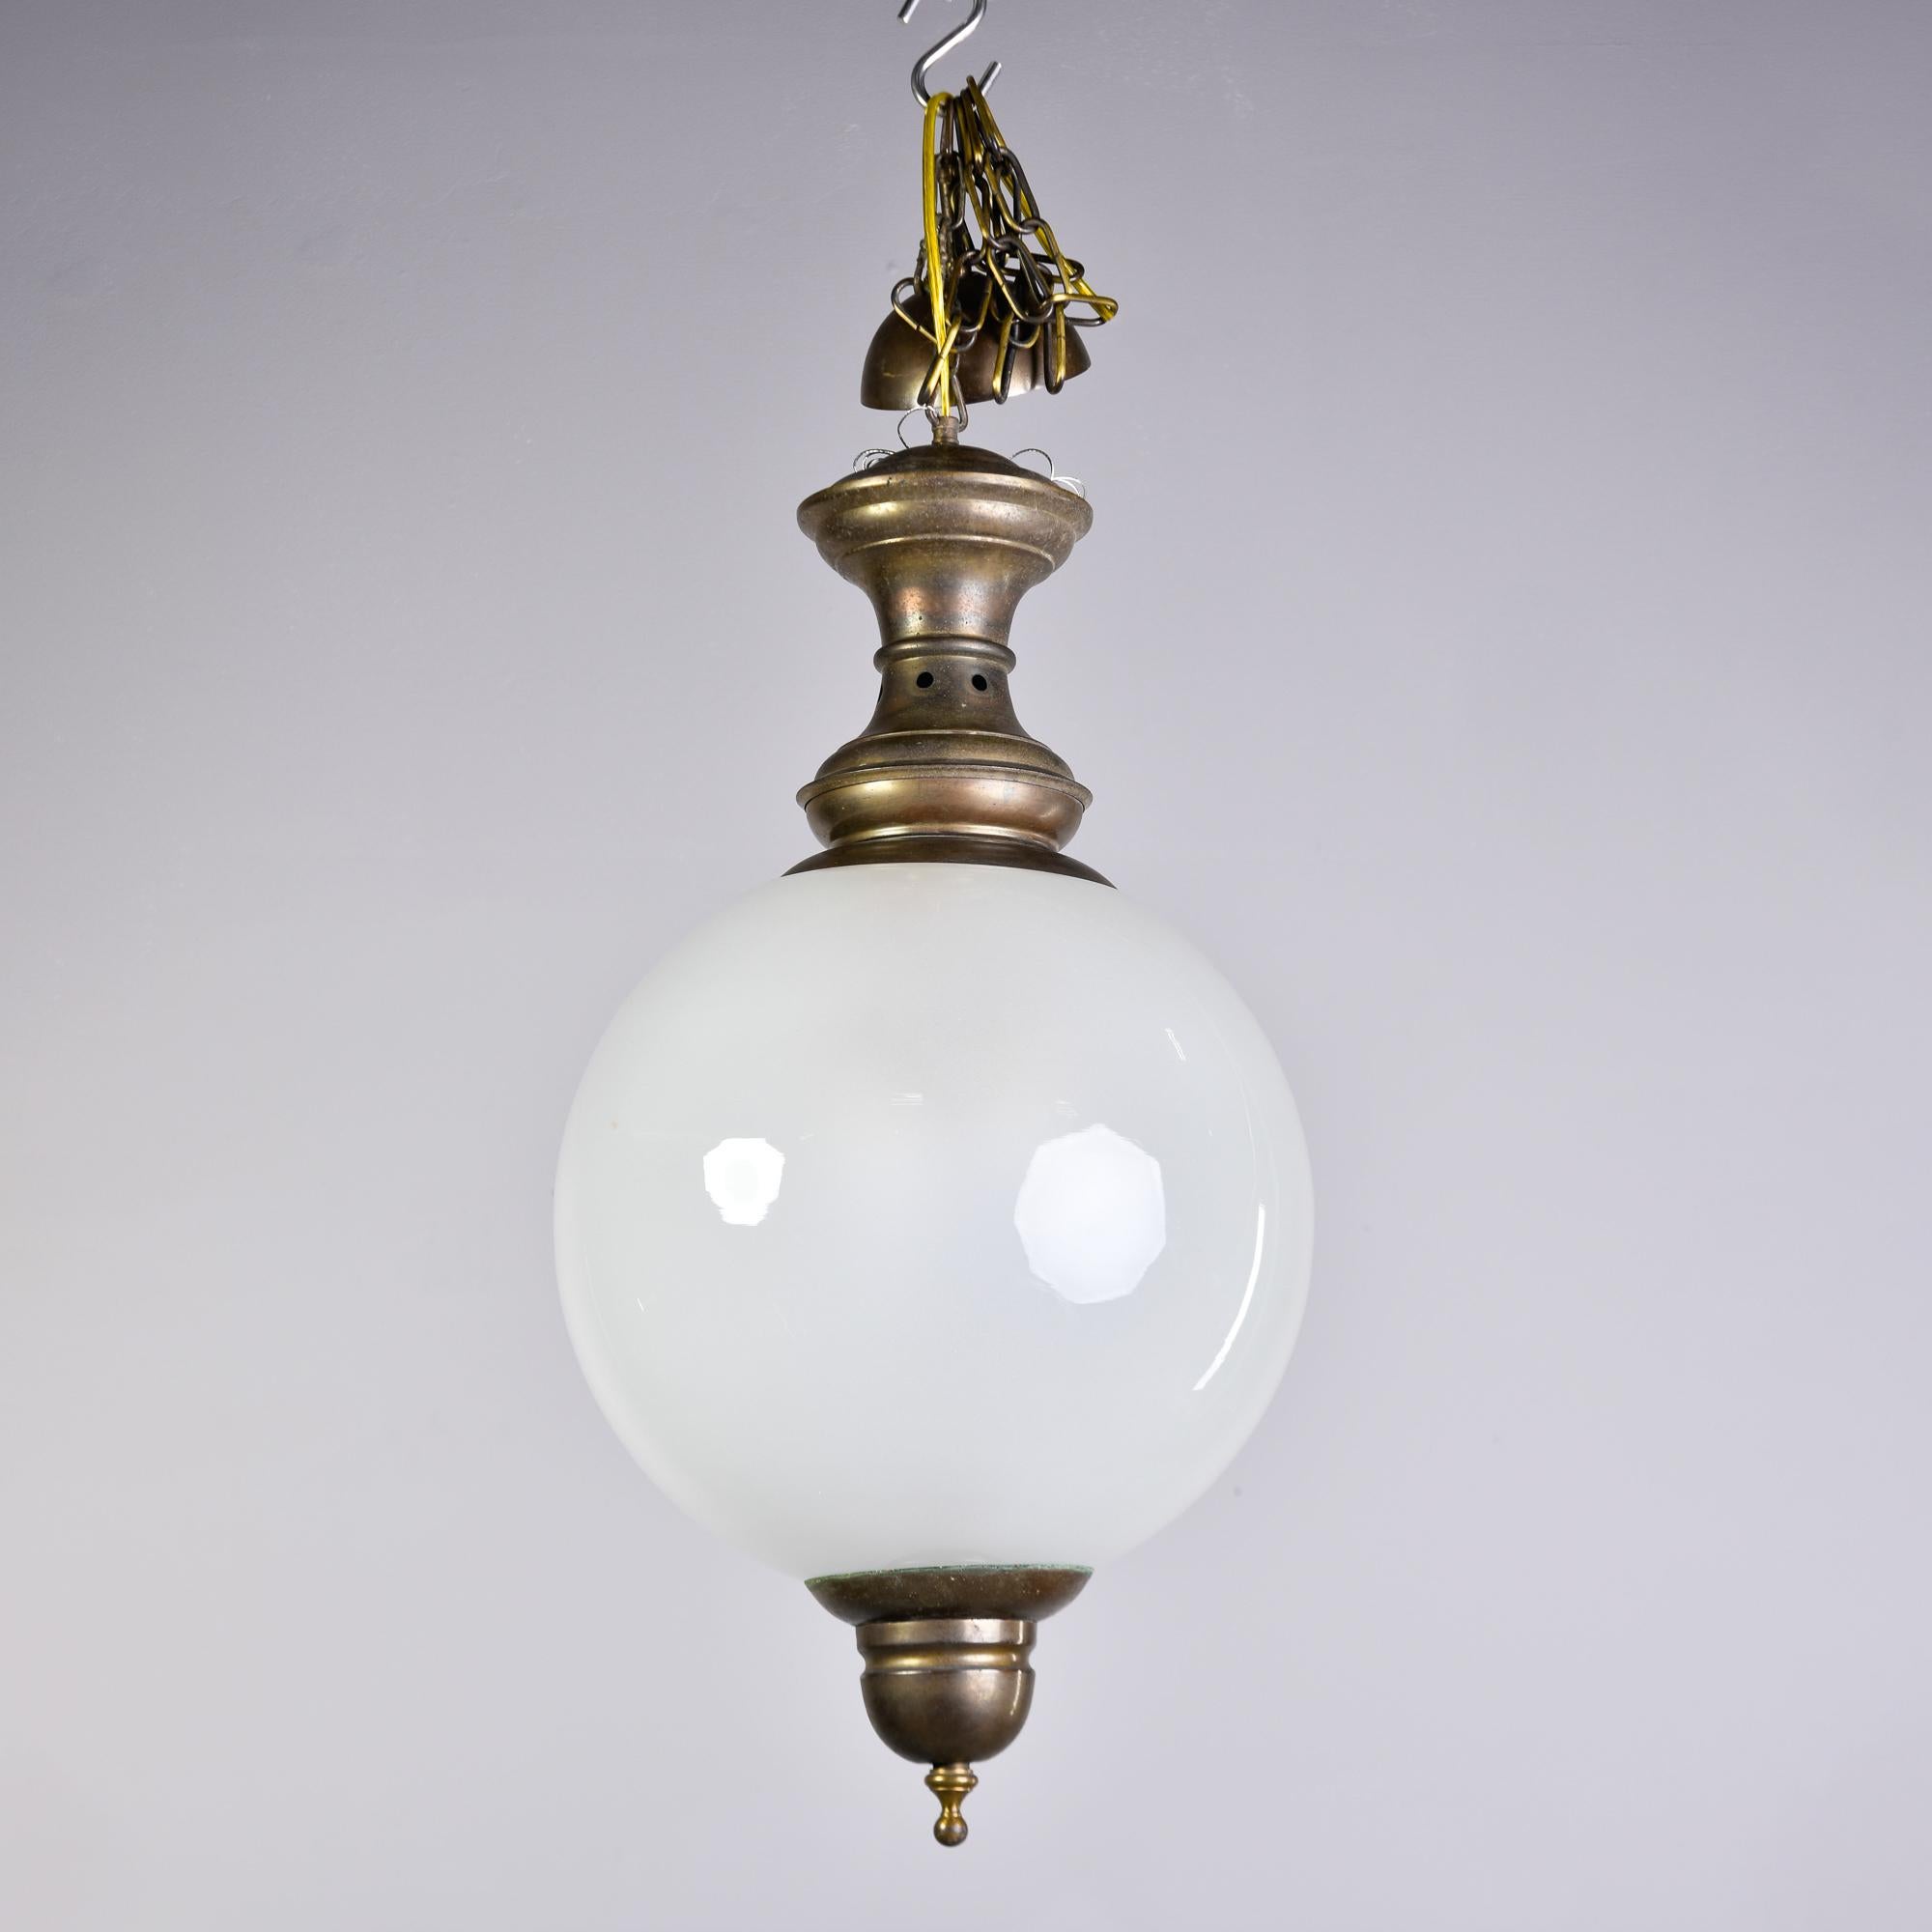 Found in Italy, this hanging pendant dates from approximately 1970. Round white glass globe with bronze fittings. Three interior standard sized sockets. Unknown maker. New wiring for US electrical standards. No flaws found.